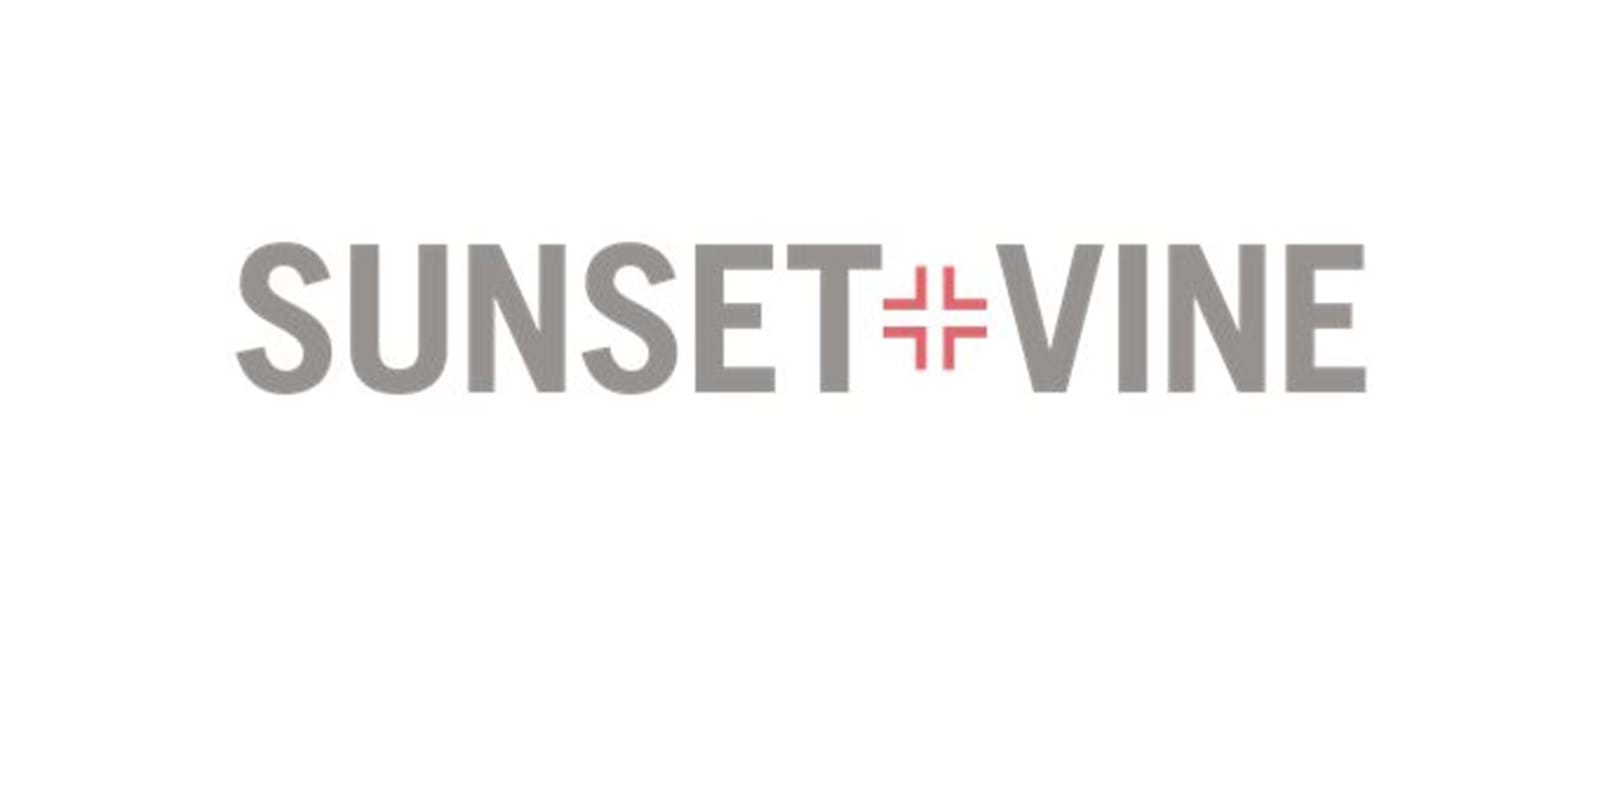 Sunset+Vine teams up with Channel 4 to bring playground favourite to British television 